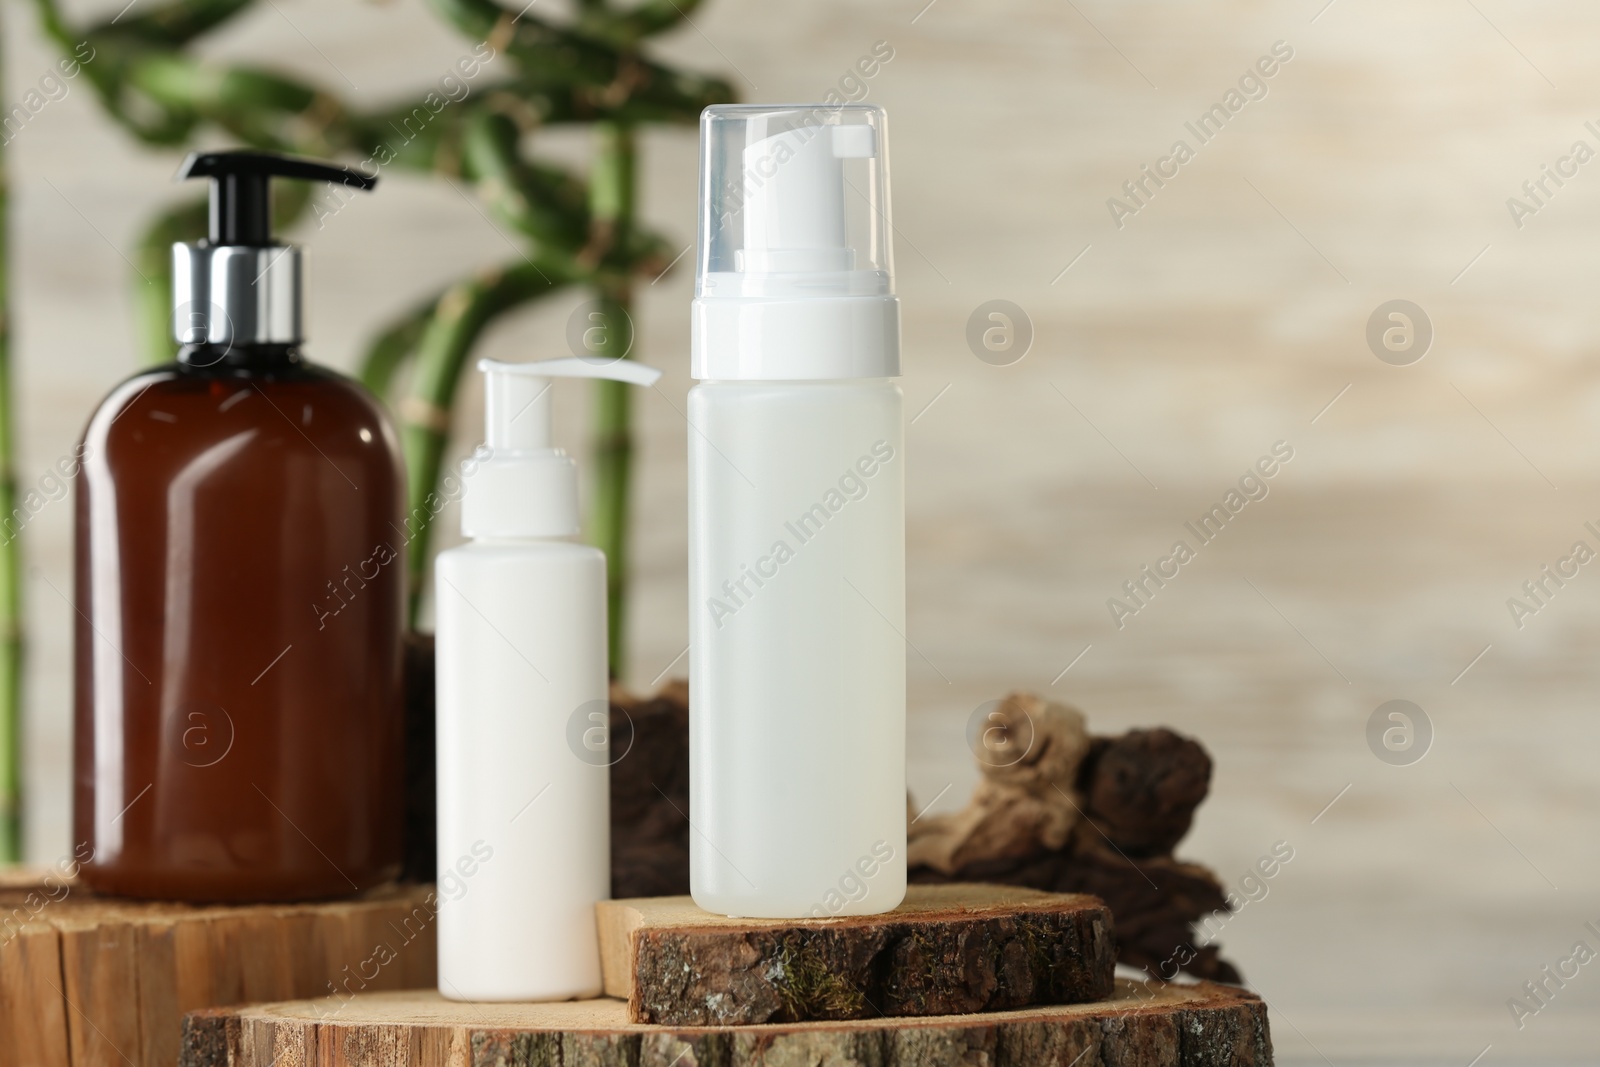 Photo of Bottles of face cleansing products on wooden stand